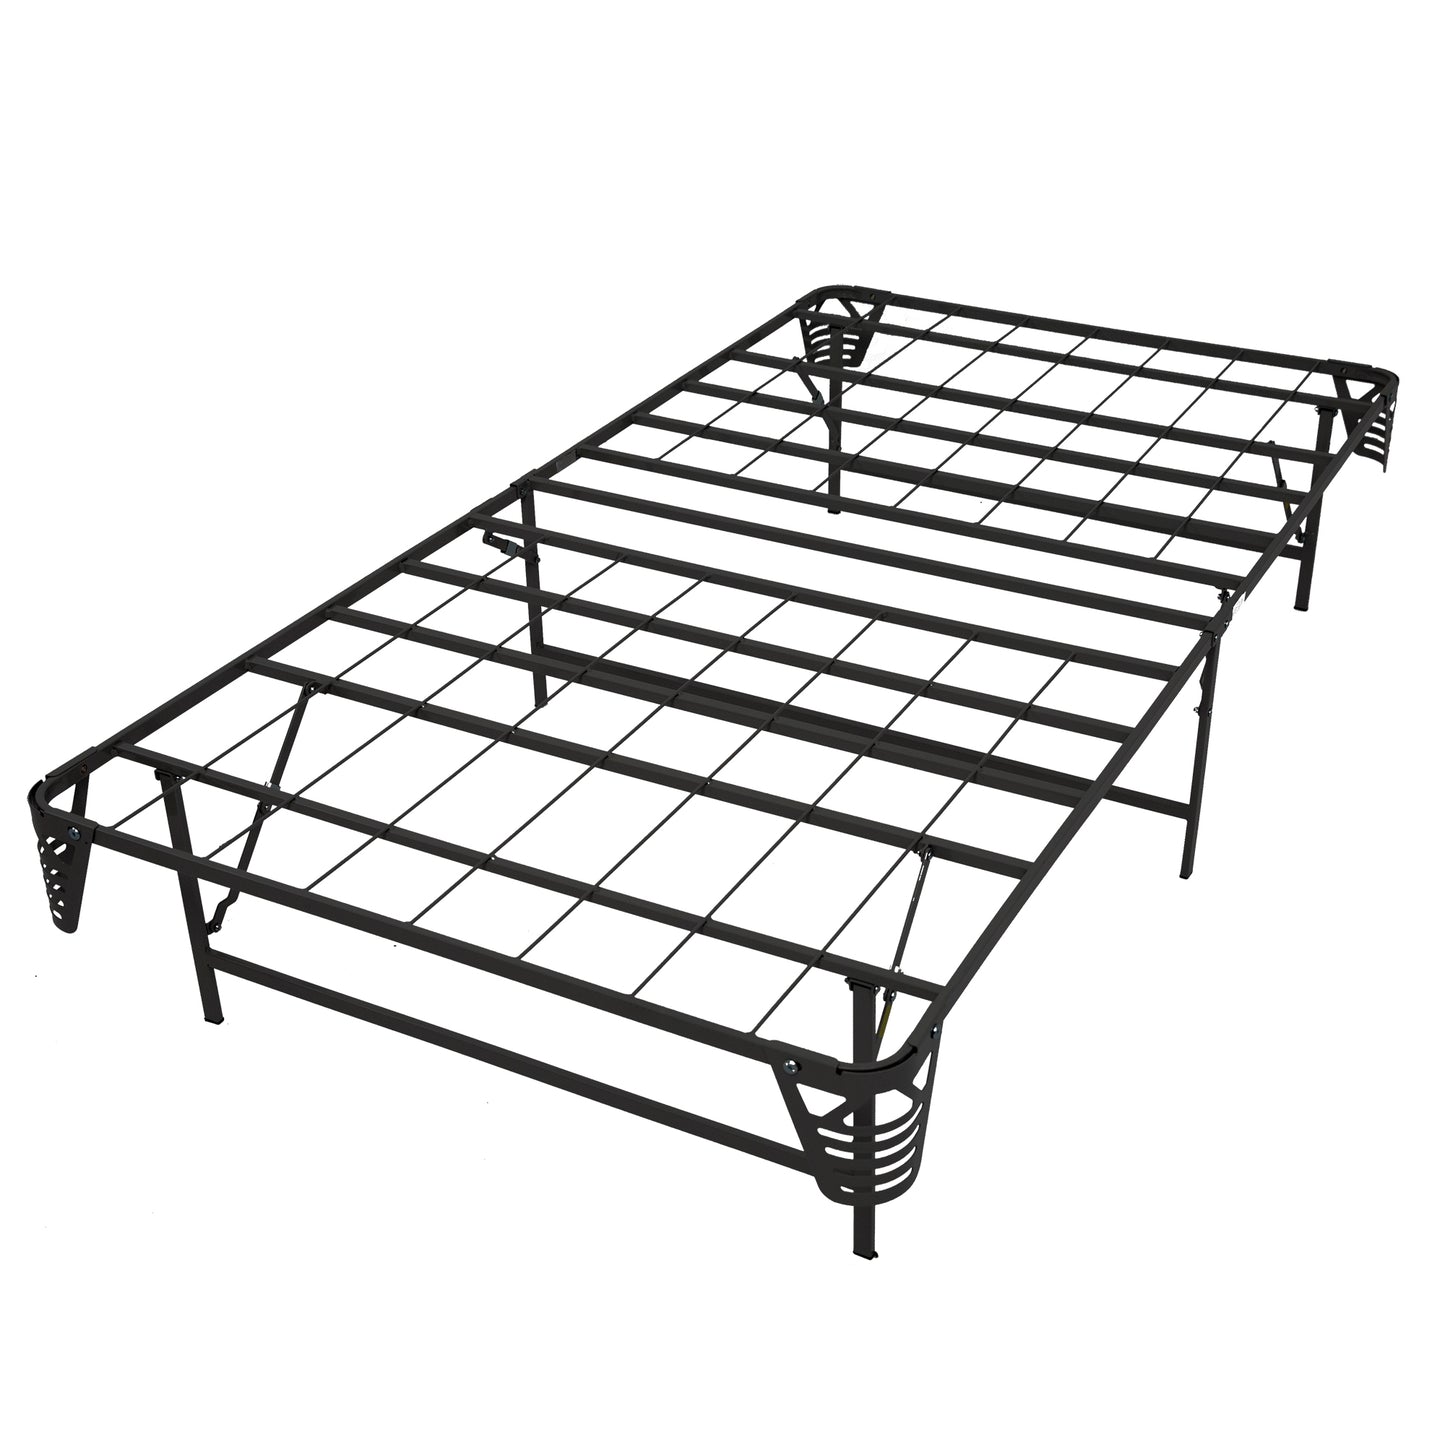 Queen Platform Bed Frame (Space saver bed / bed risers